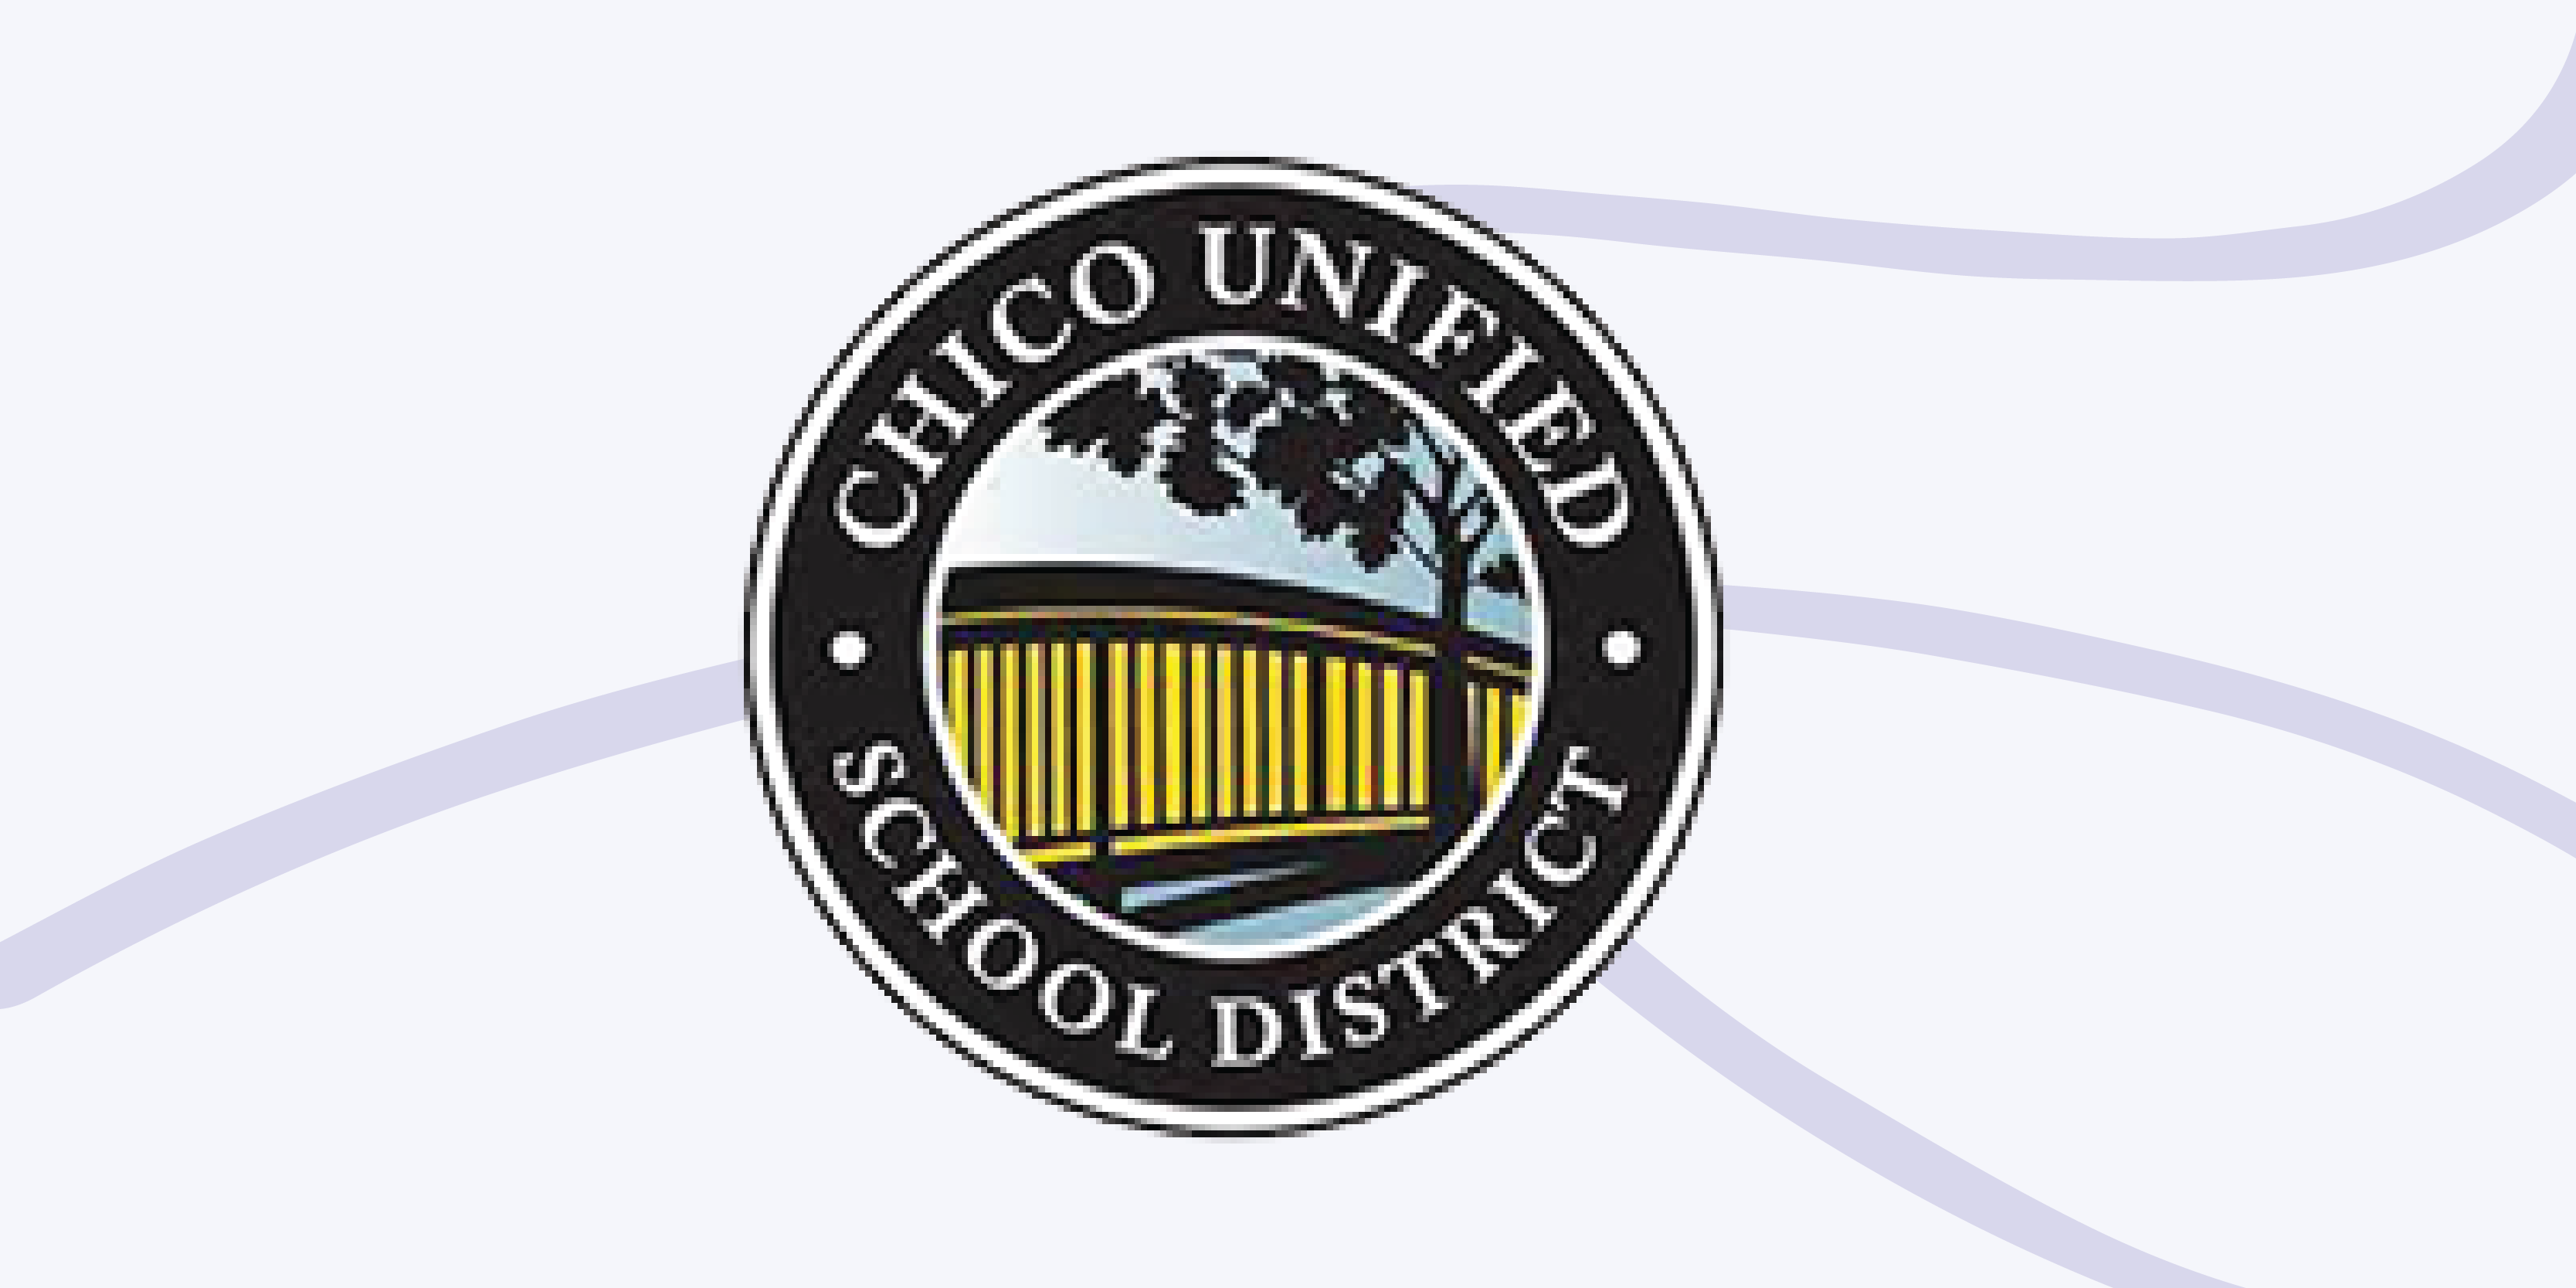 Chico Unified School District